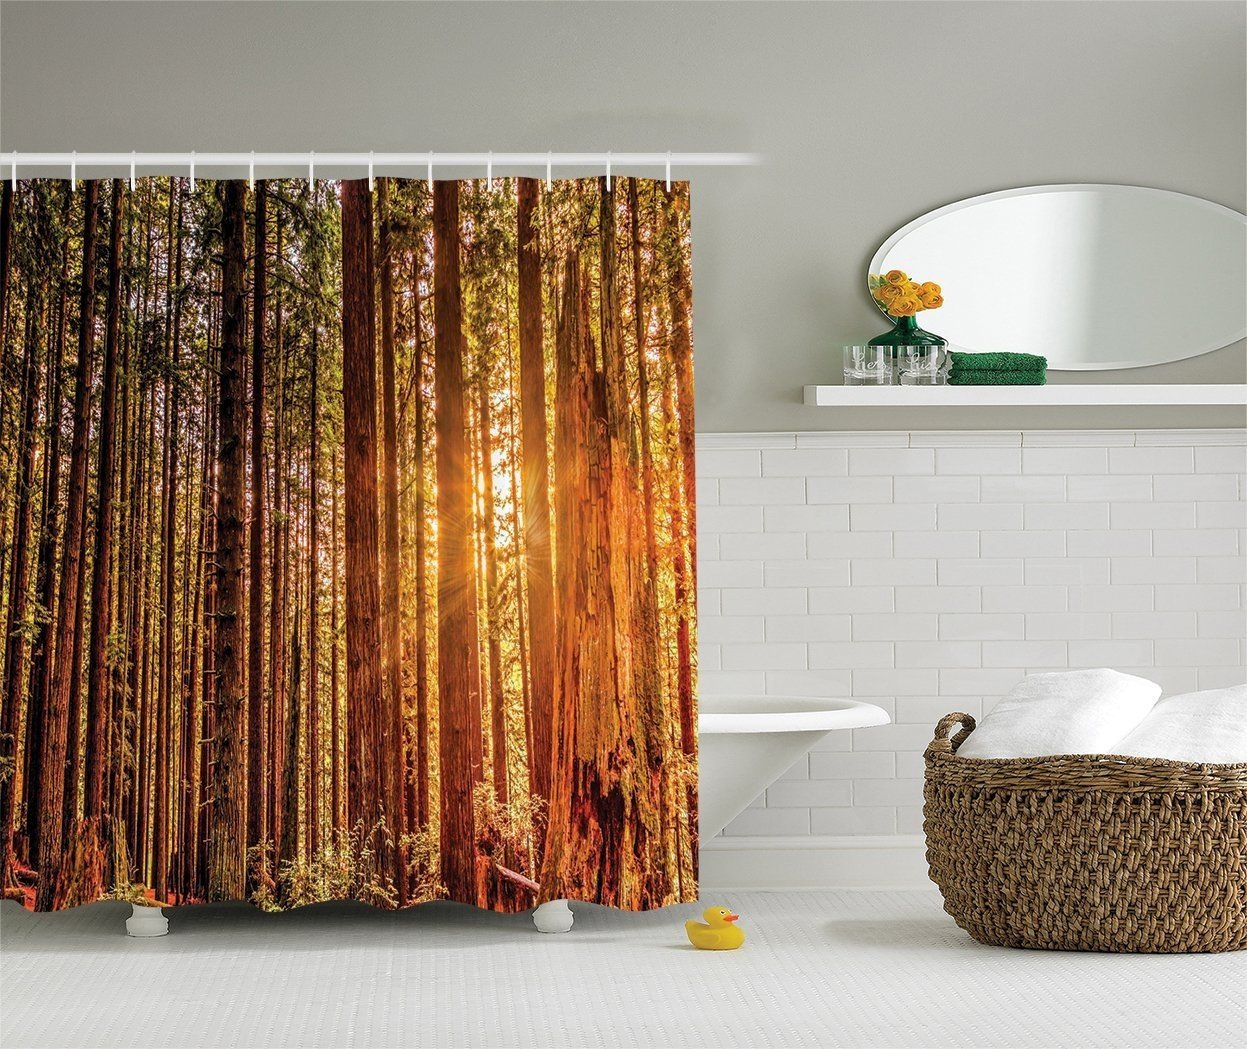 Ambesonne USA National Park Decor Collection, Tall Trees Redwoods Forestry and Sunshine Picture Print, Polyester Fabric Bathroom Shower Curtain Set with Hooks, Green Orange Brown